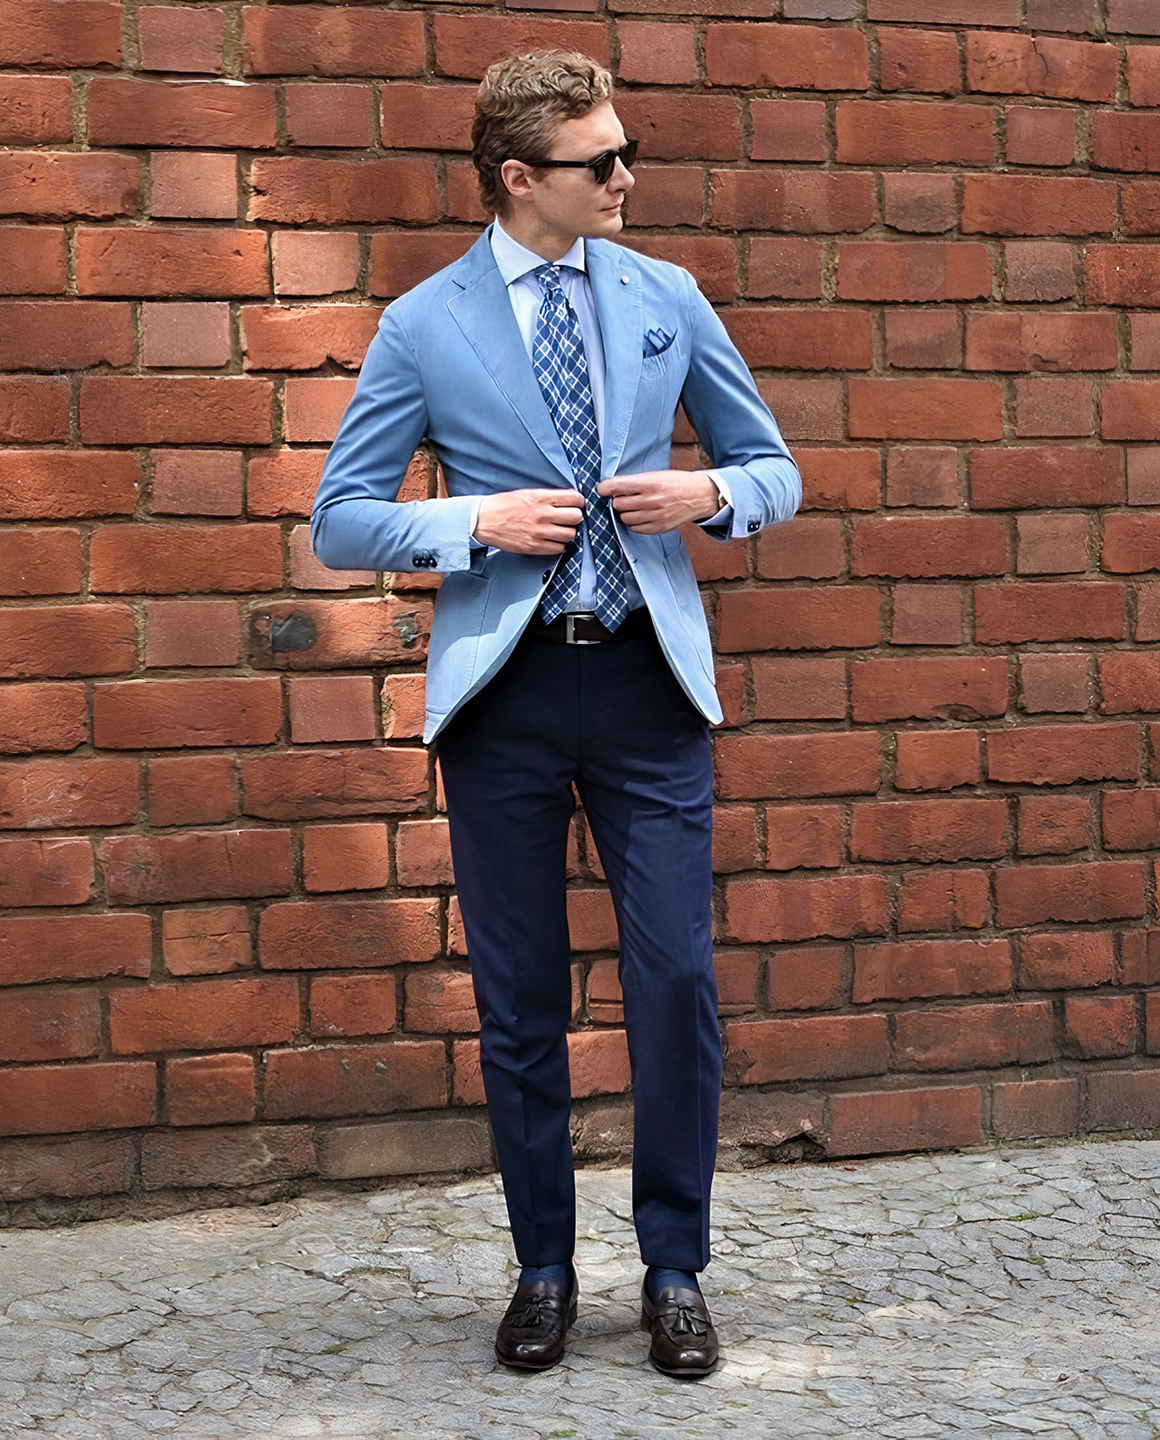 Man in blue suit jacket and black pants holding brown leather bag photo   Free استان تهران ایران Image on Unsplash